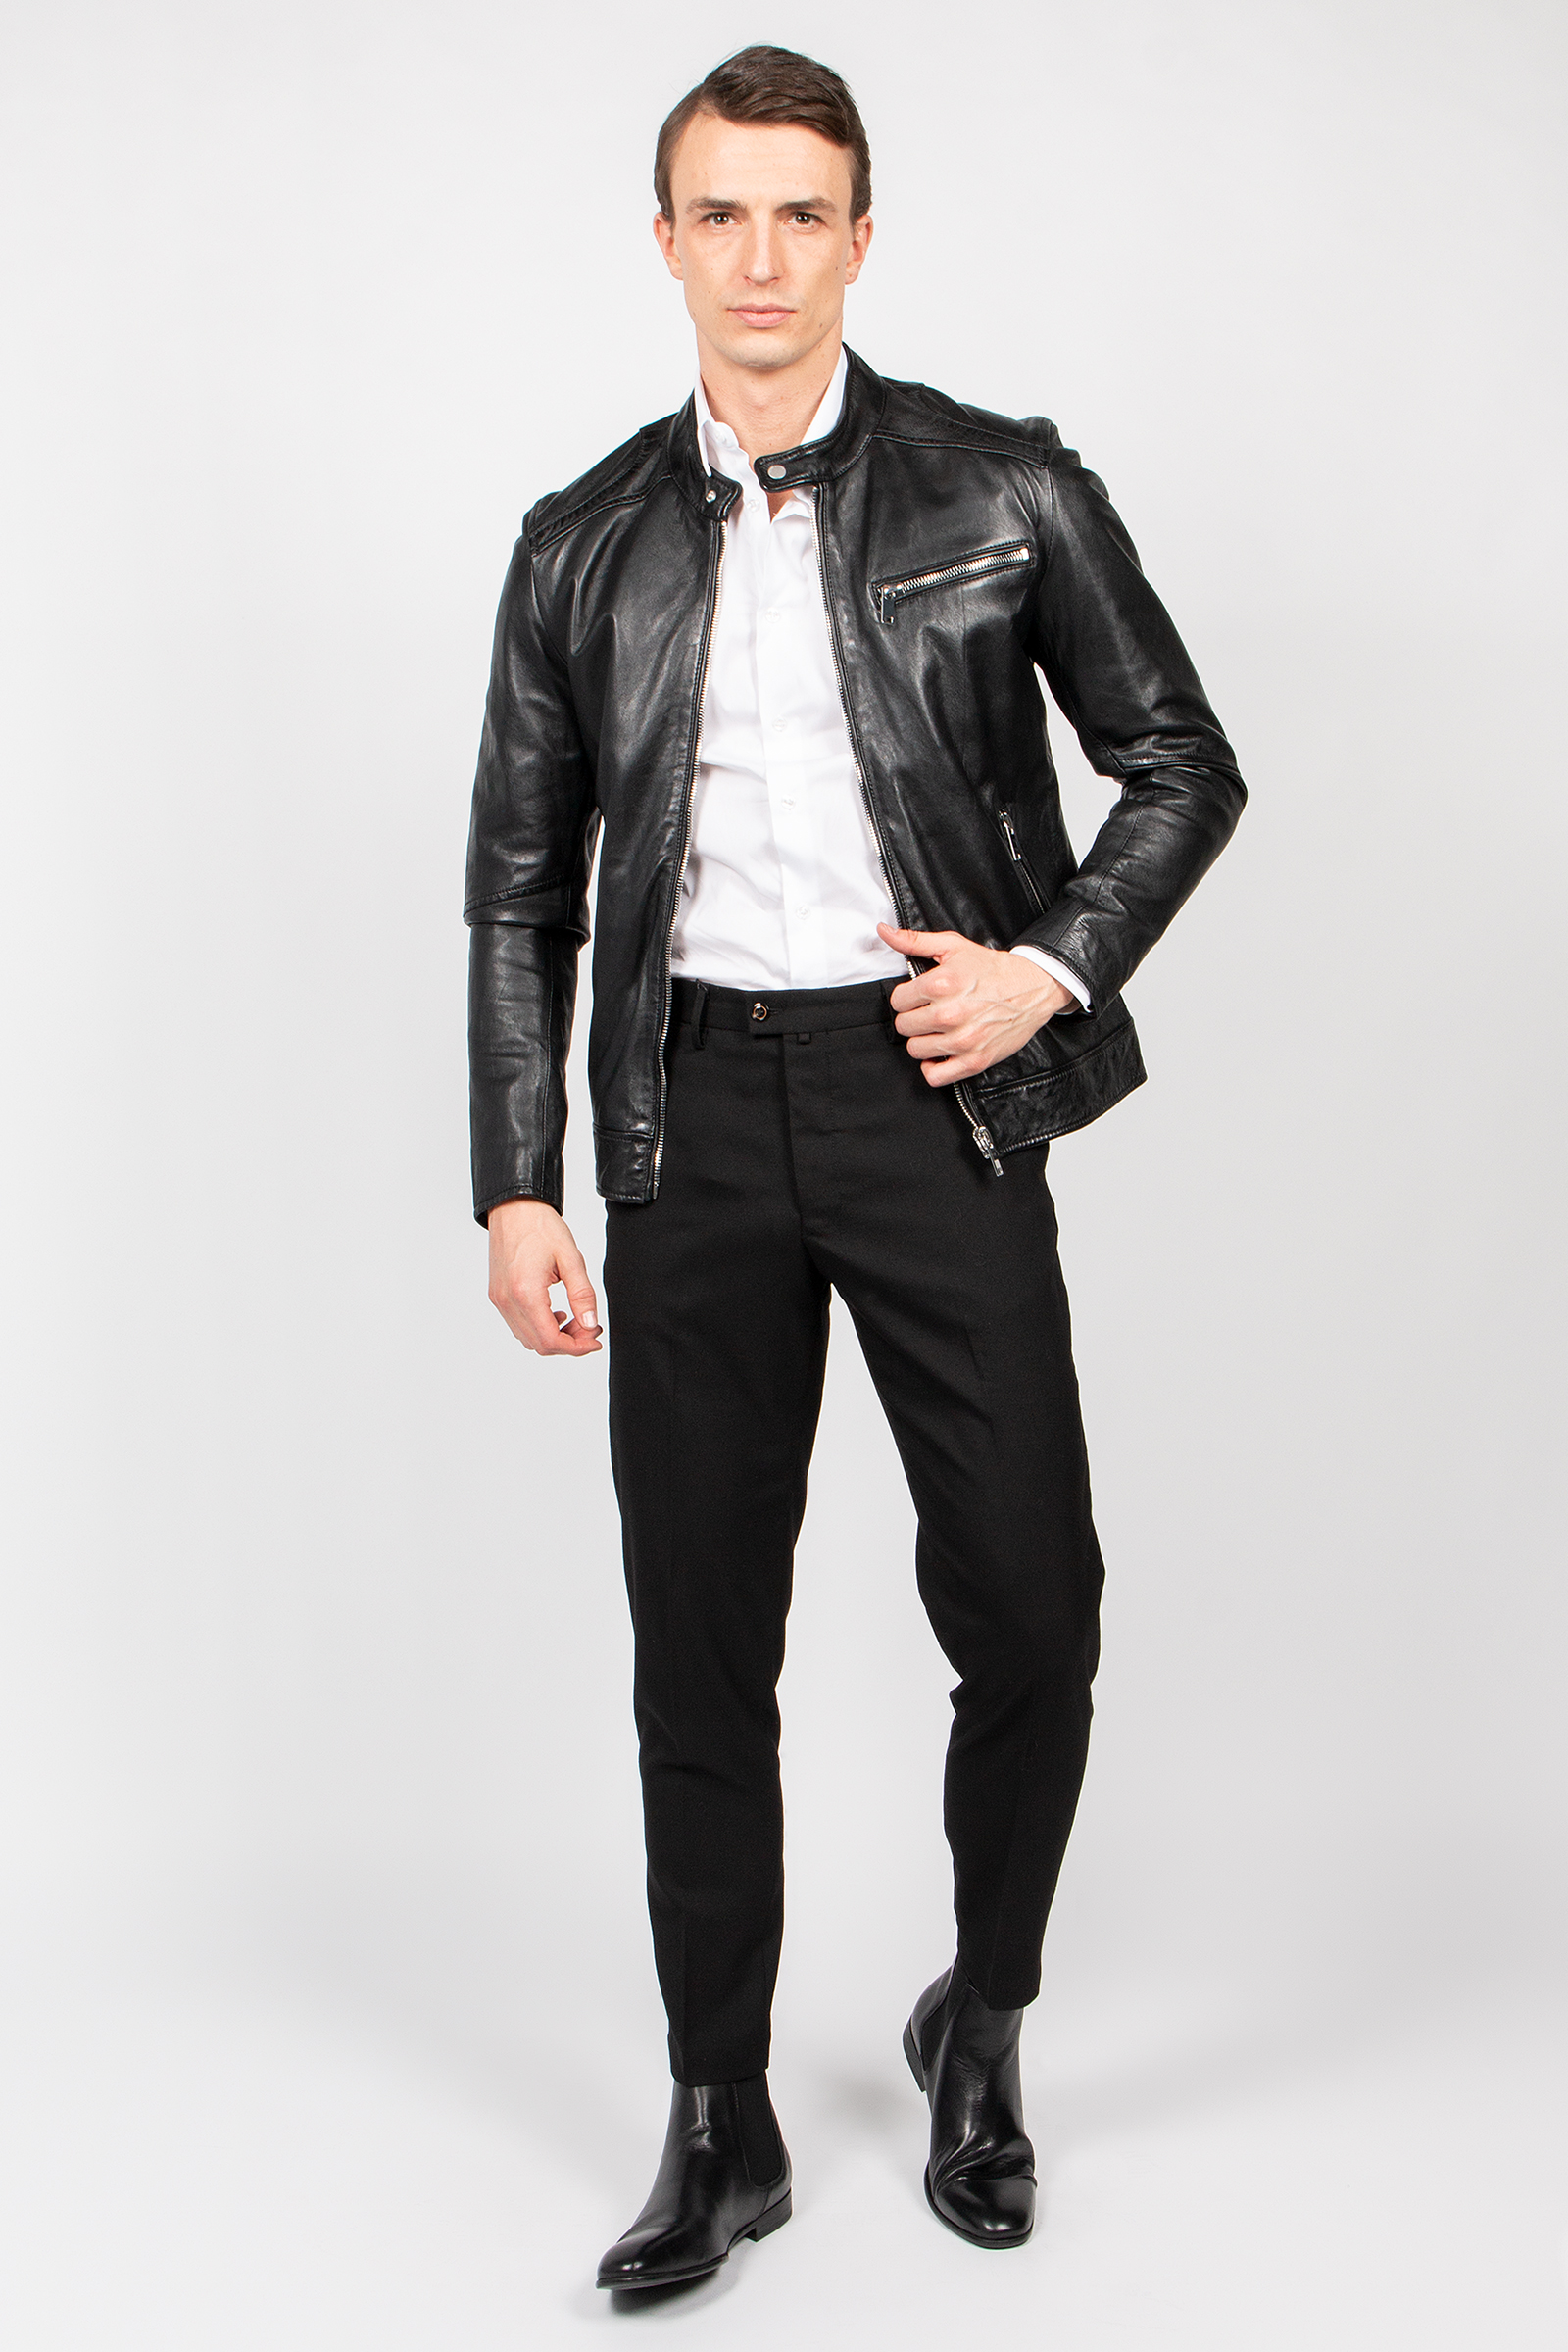 Lucky Jim-FN | Nation Freaky | Leather Jackets Men 